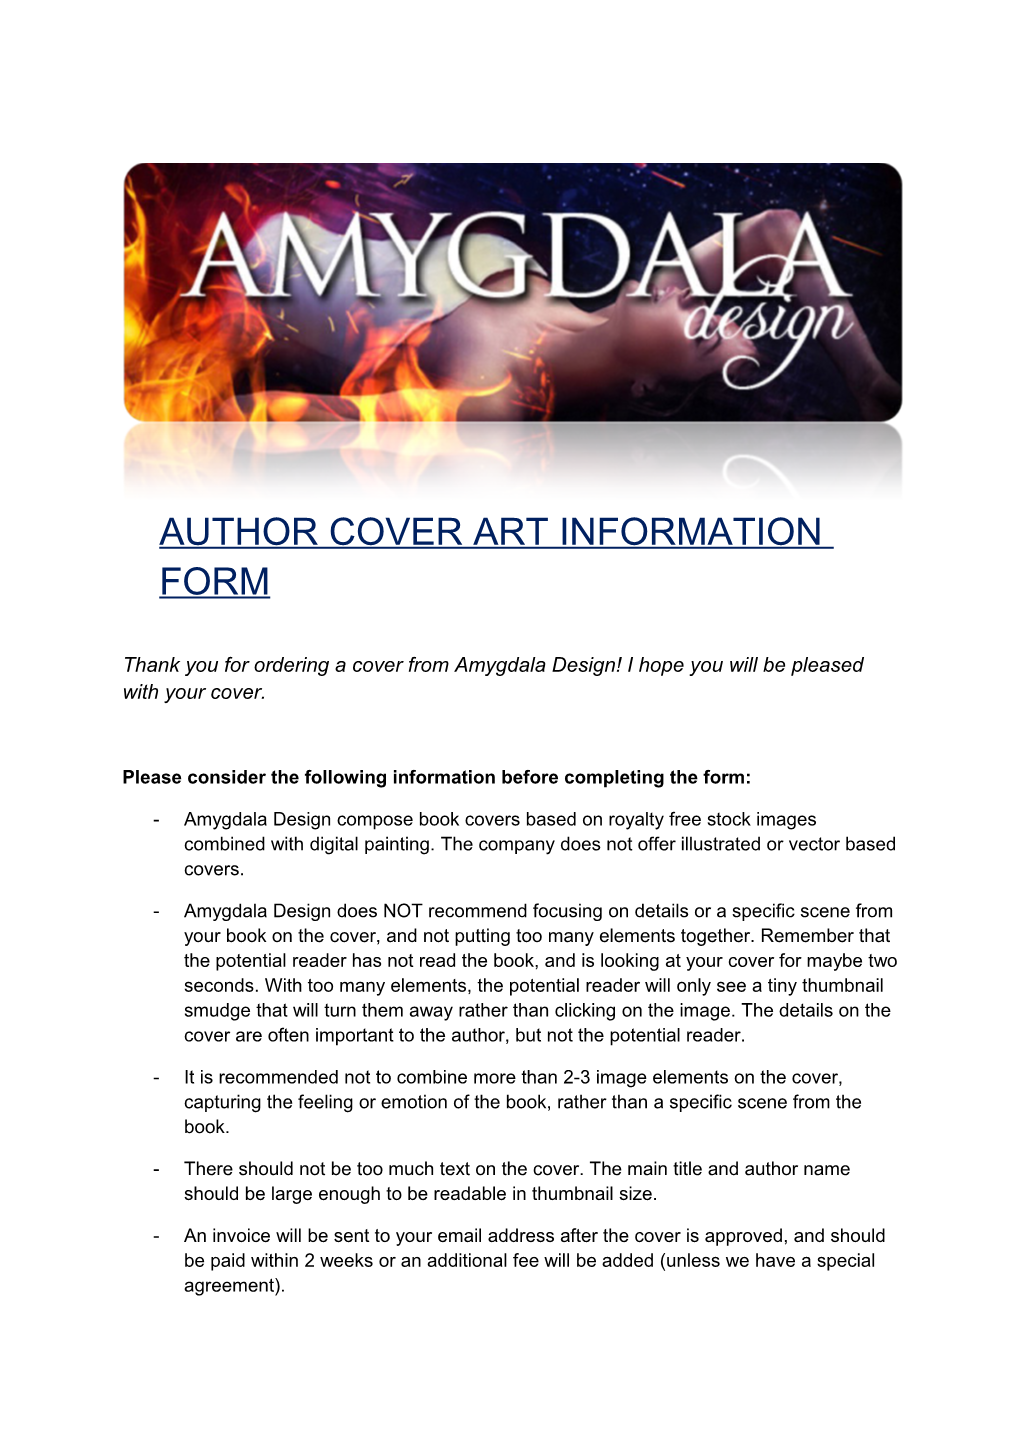 Author Cover Art Information Form